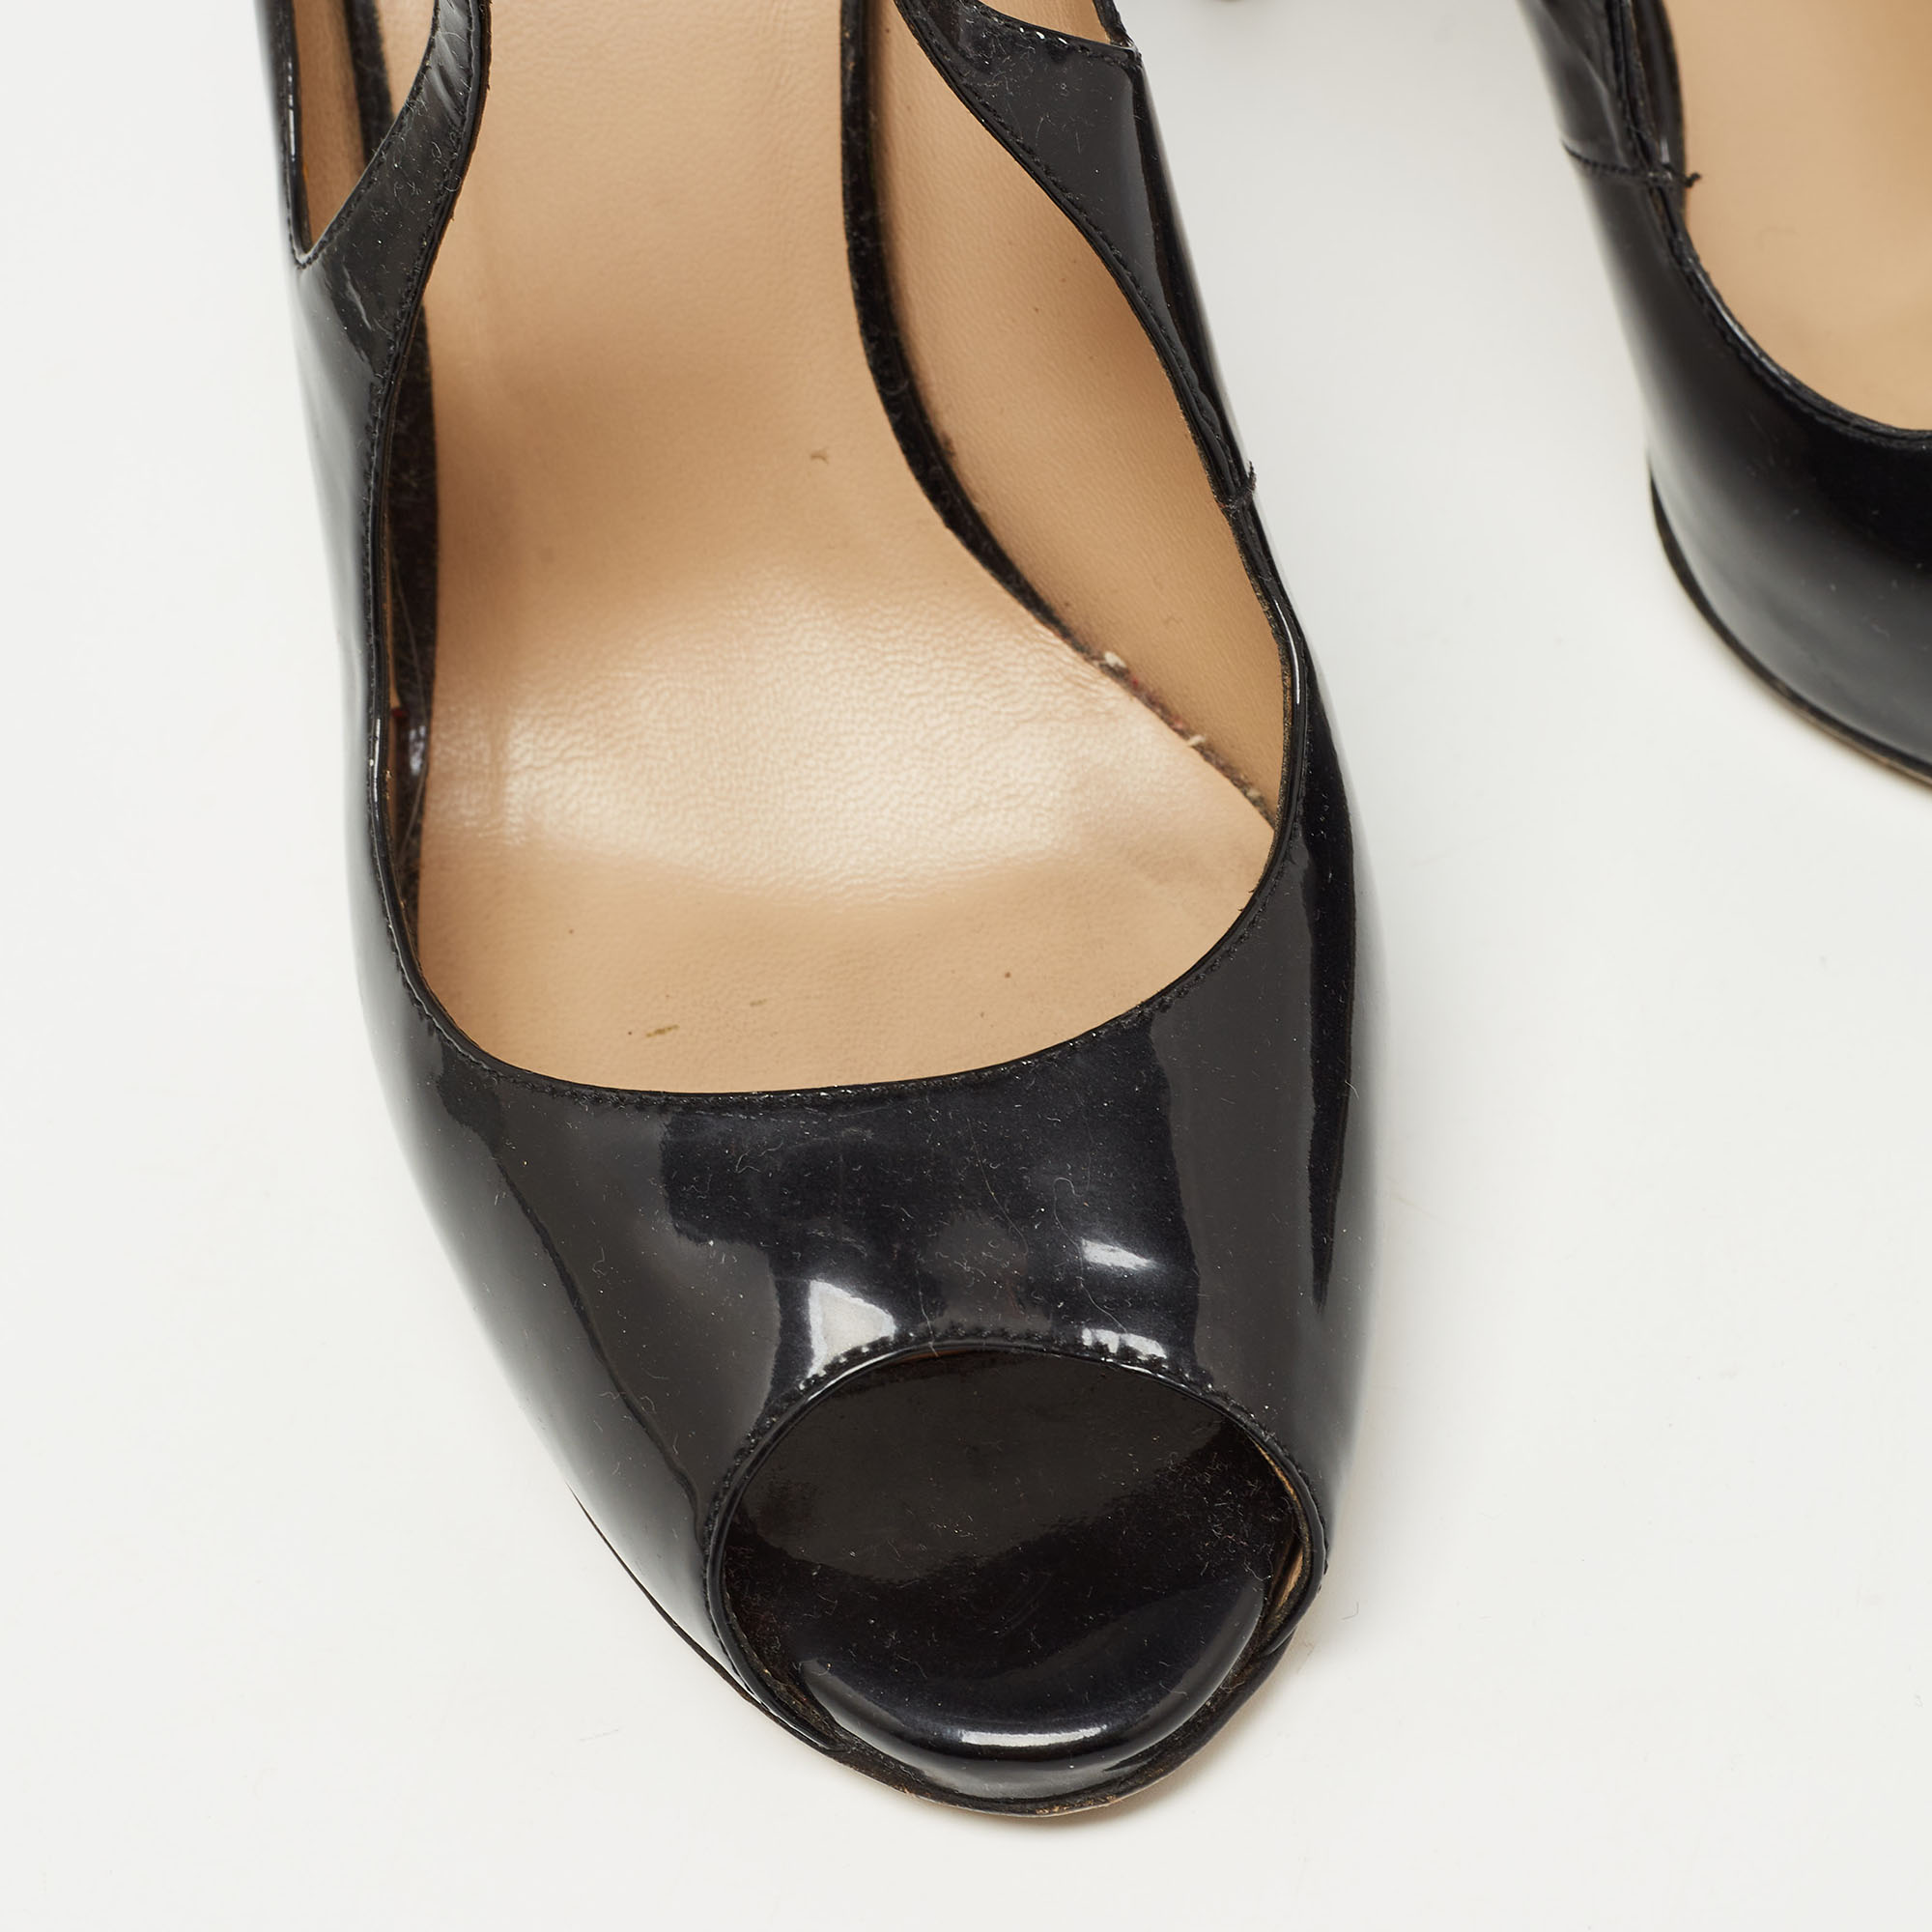 Valentino Black Patent Leather Ankle Strap Pumps Size 39.5